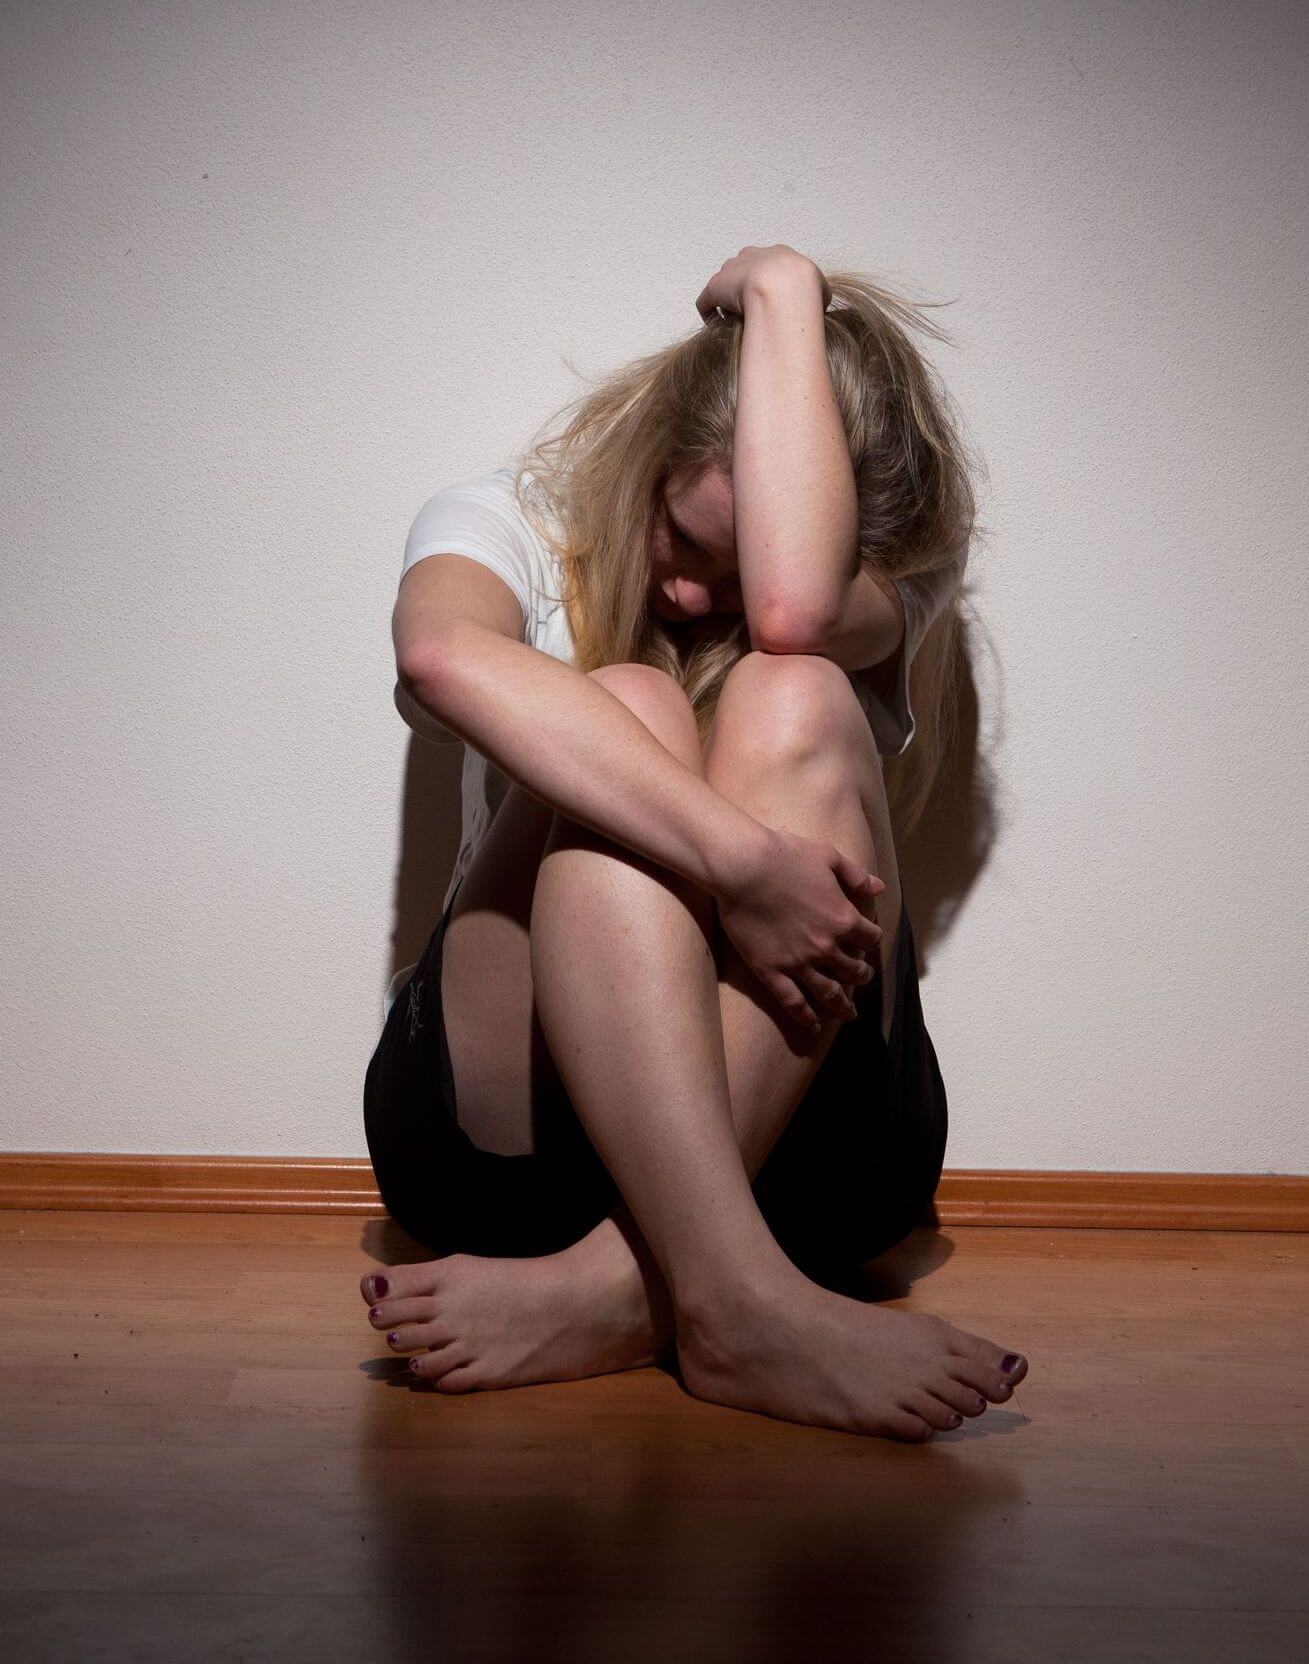 CICA Sexual Abuse Claims